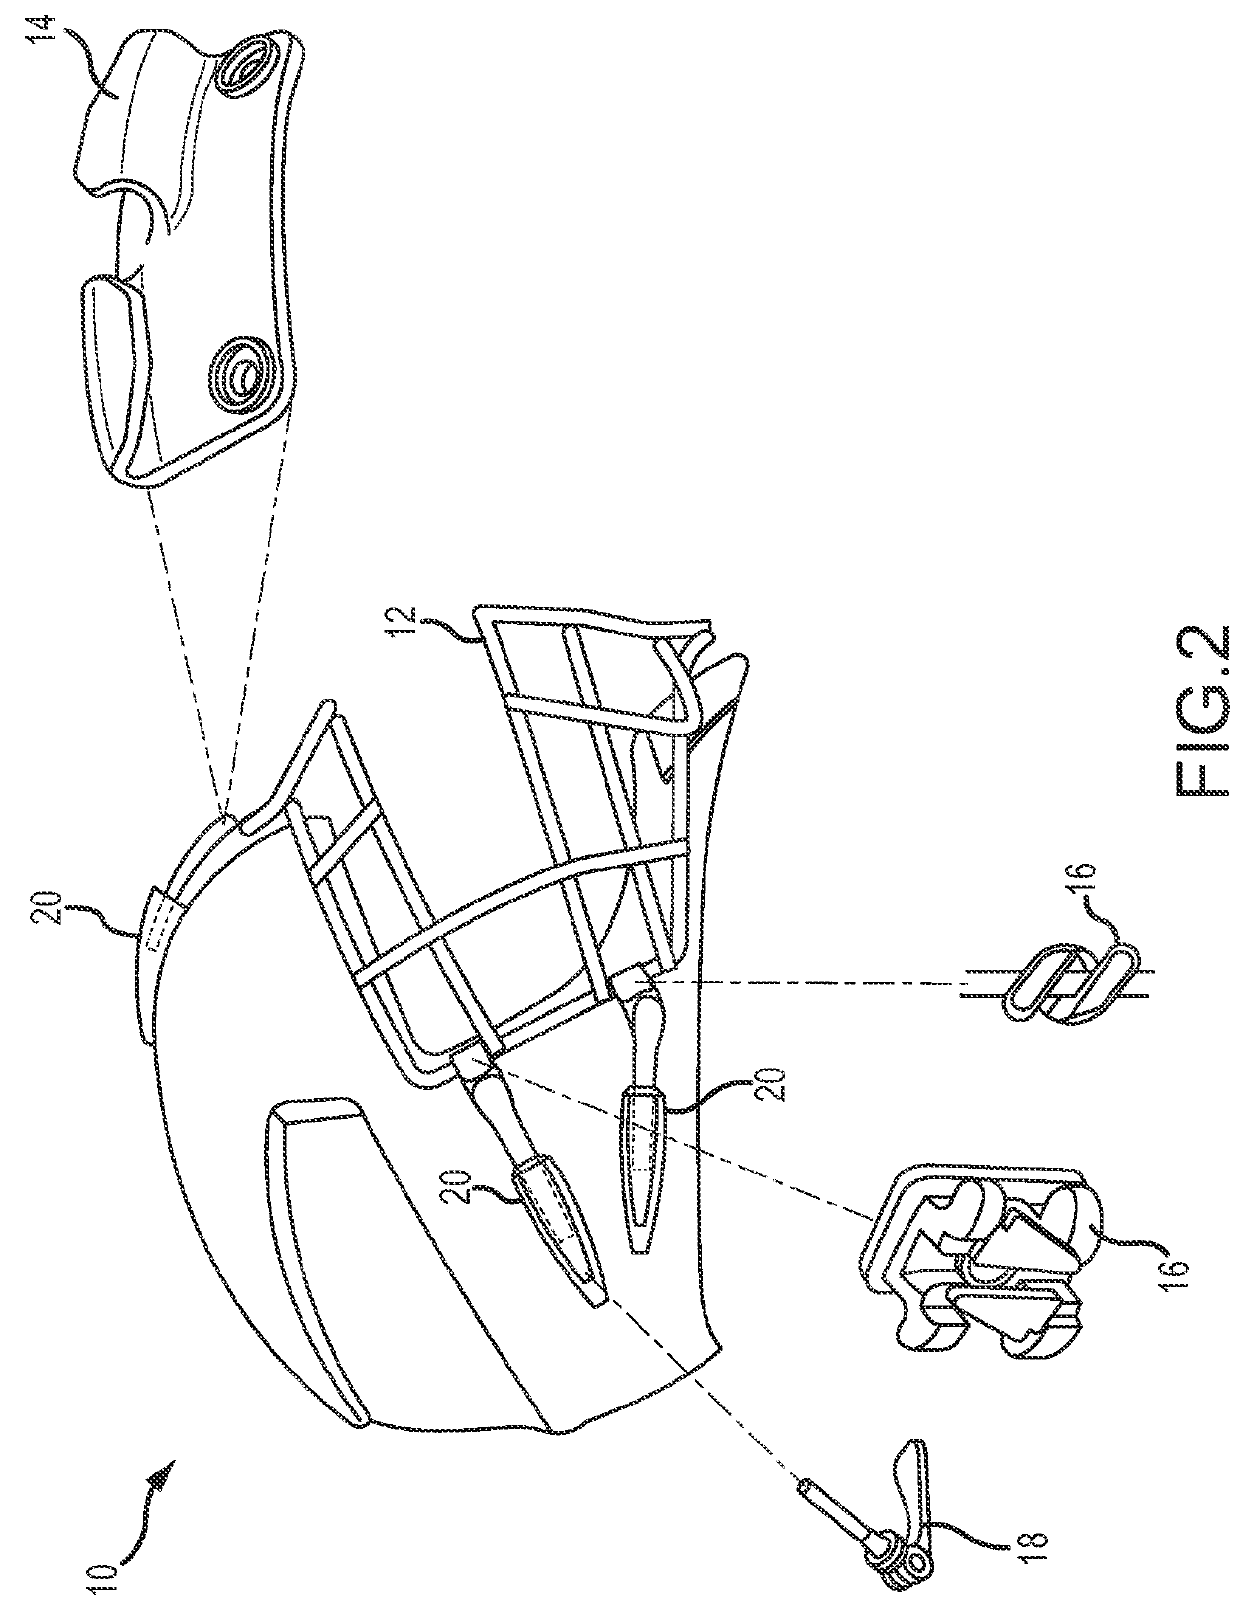 Helmet for Reducing Concussive Forces During Collision and Facilitating Rapid Facemask Removal